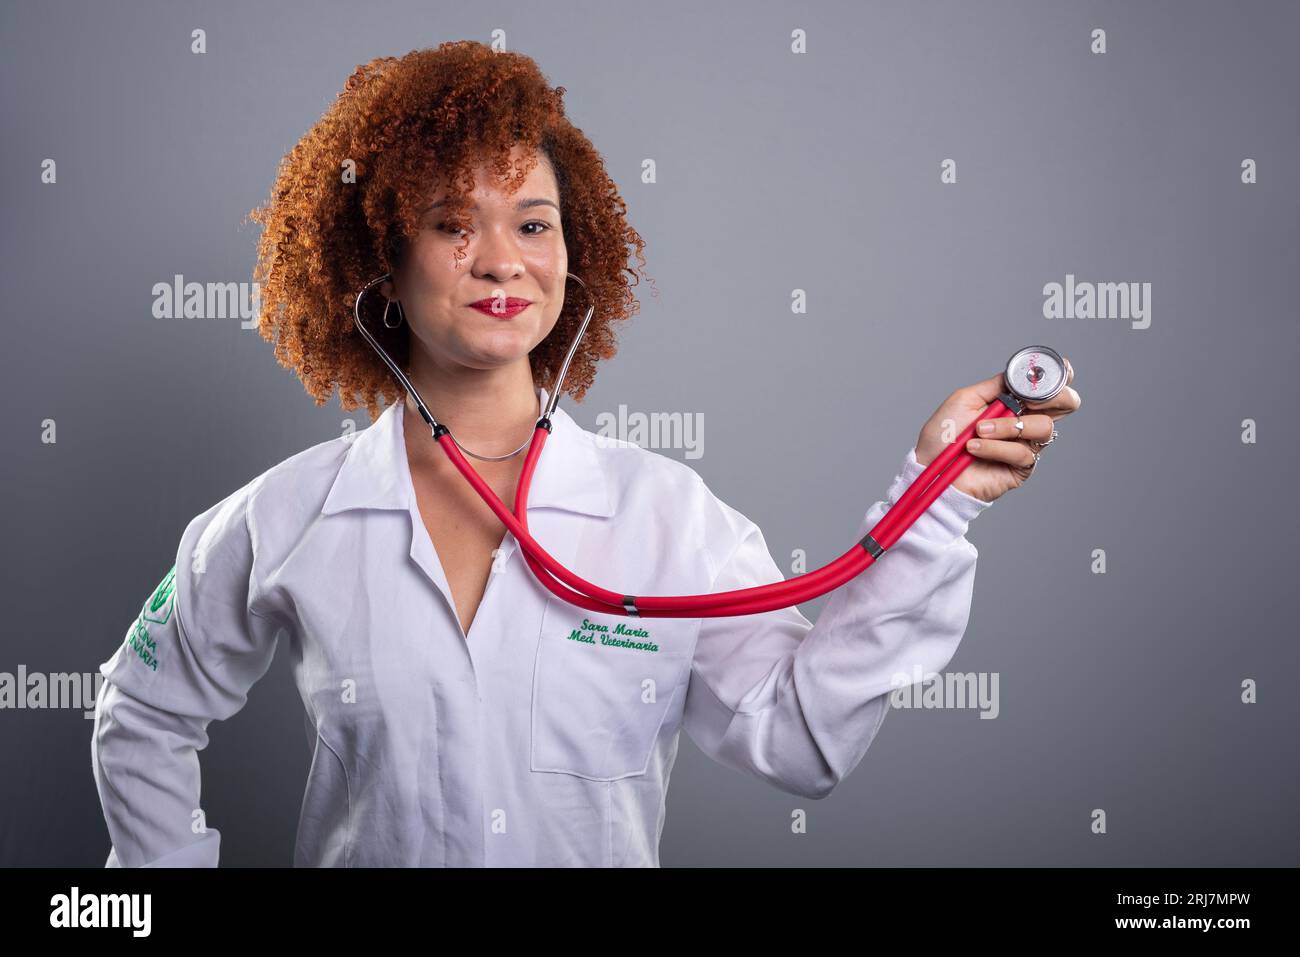 Beautiful woman with red hair, veterinarian, holding a stethoscope in a white uniform. Animal care concept. Isolated on gray background. Stock Photo